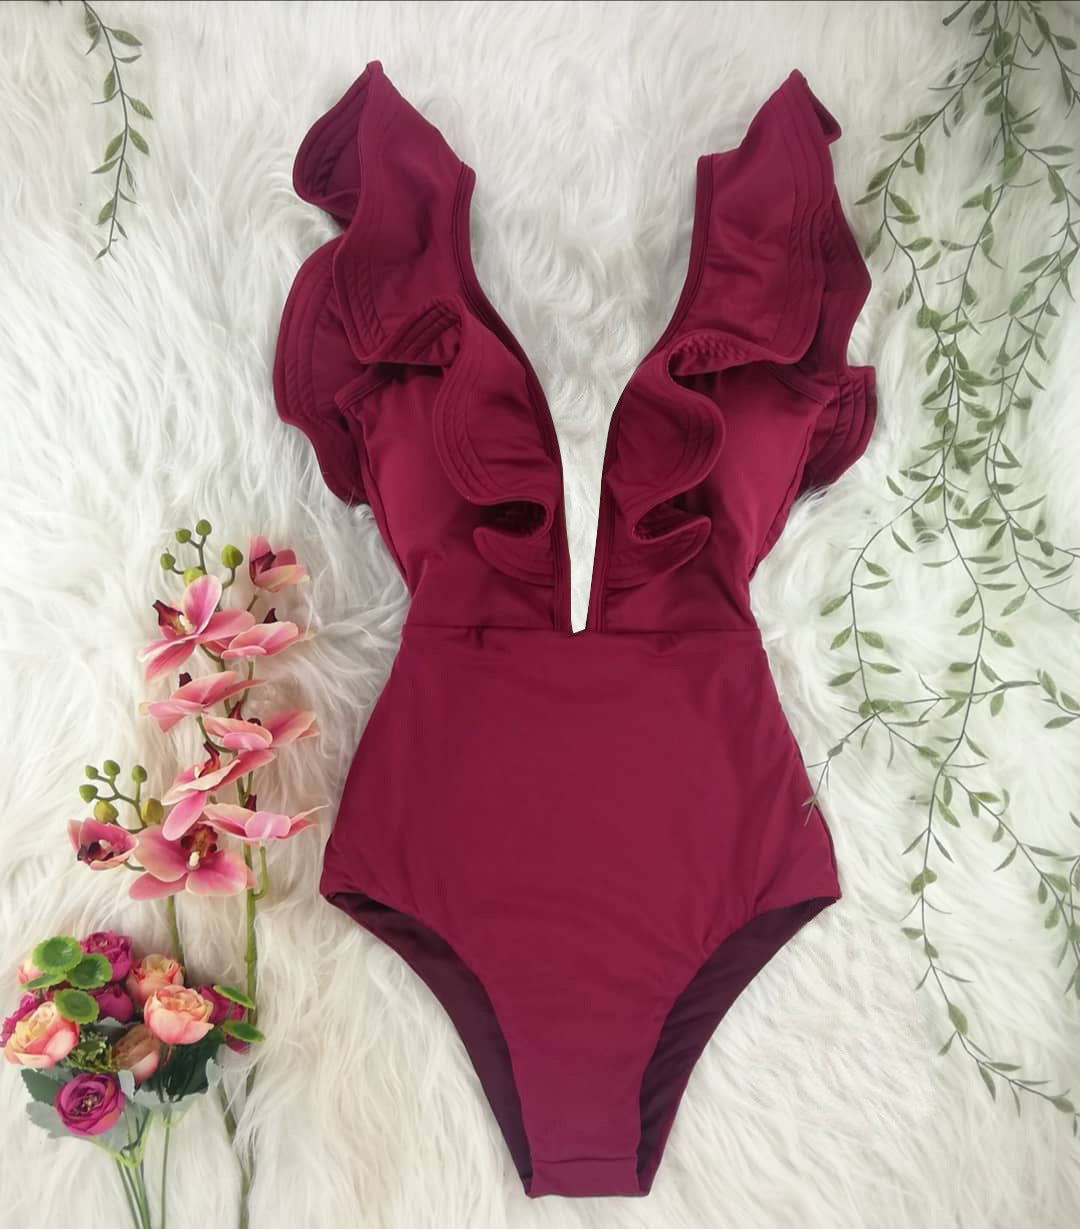 Lady’s One- Piece Shoulder Ruffle Swimsuit